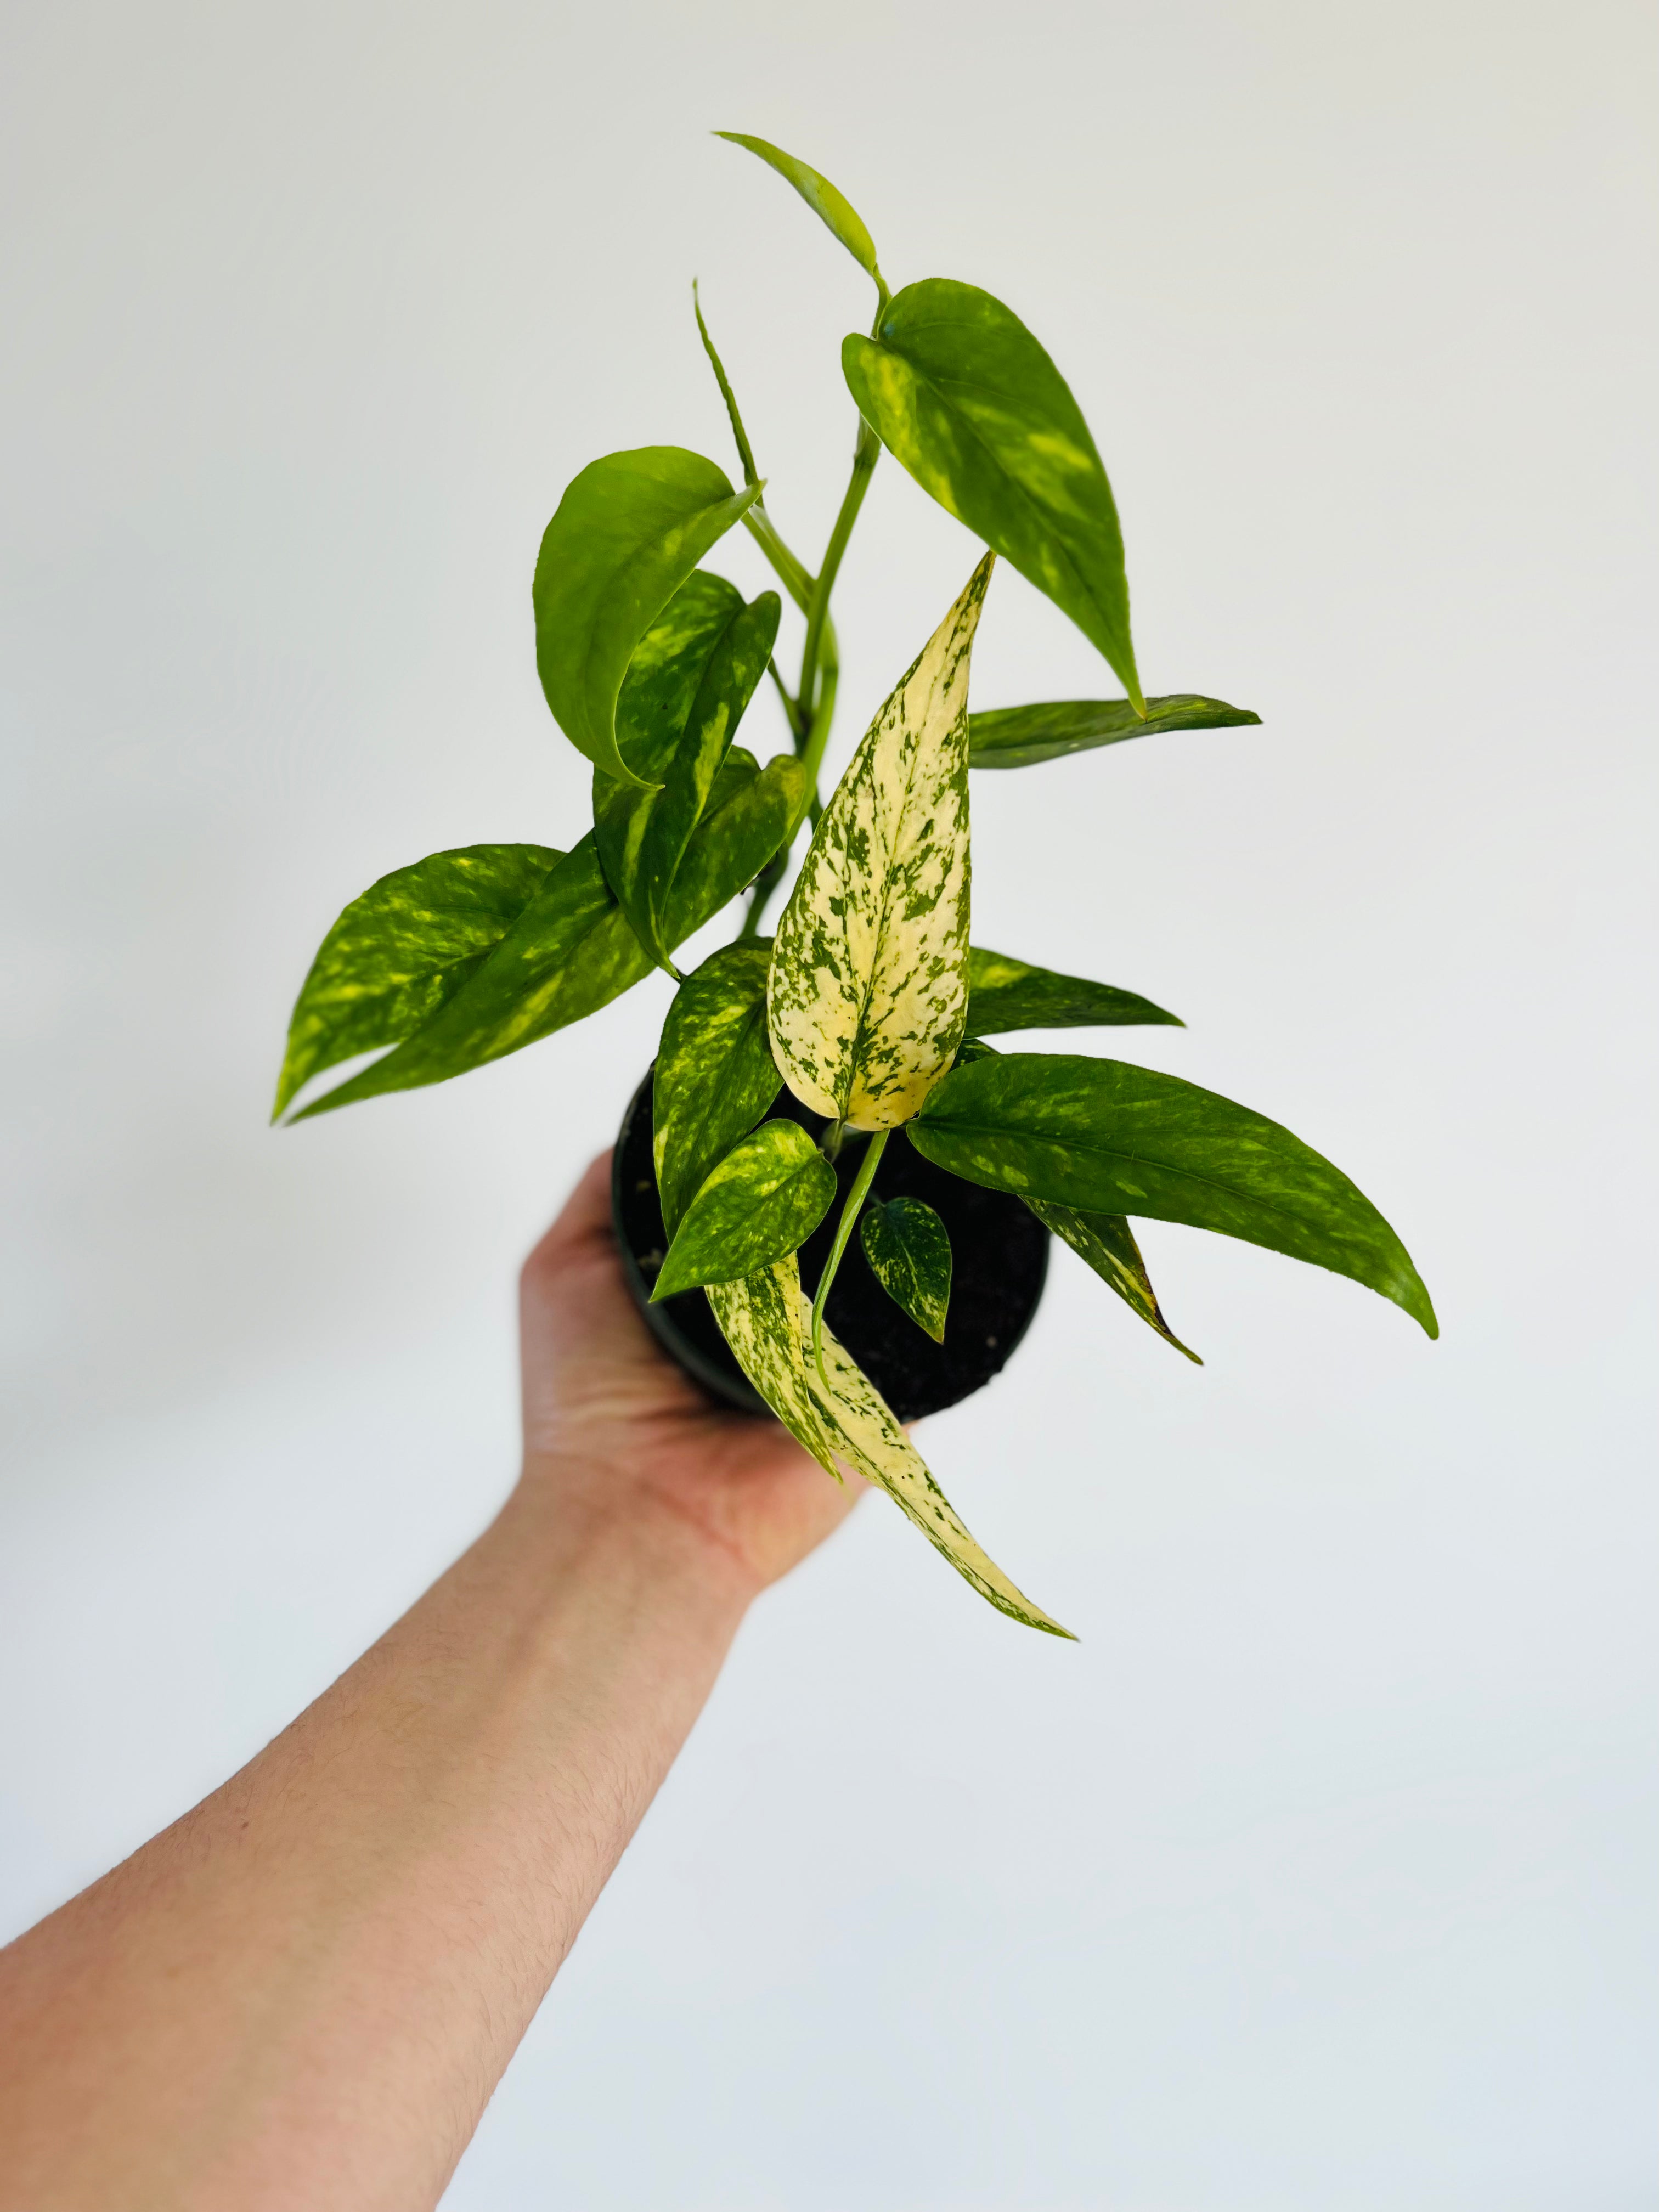 How to Grow and Care for Epipremnum Pinnatum